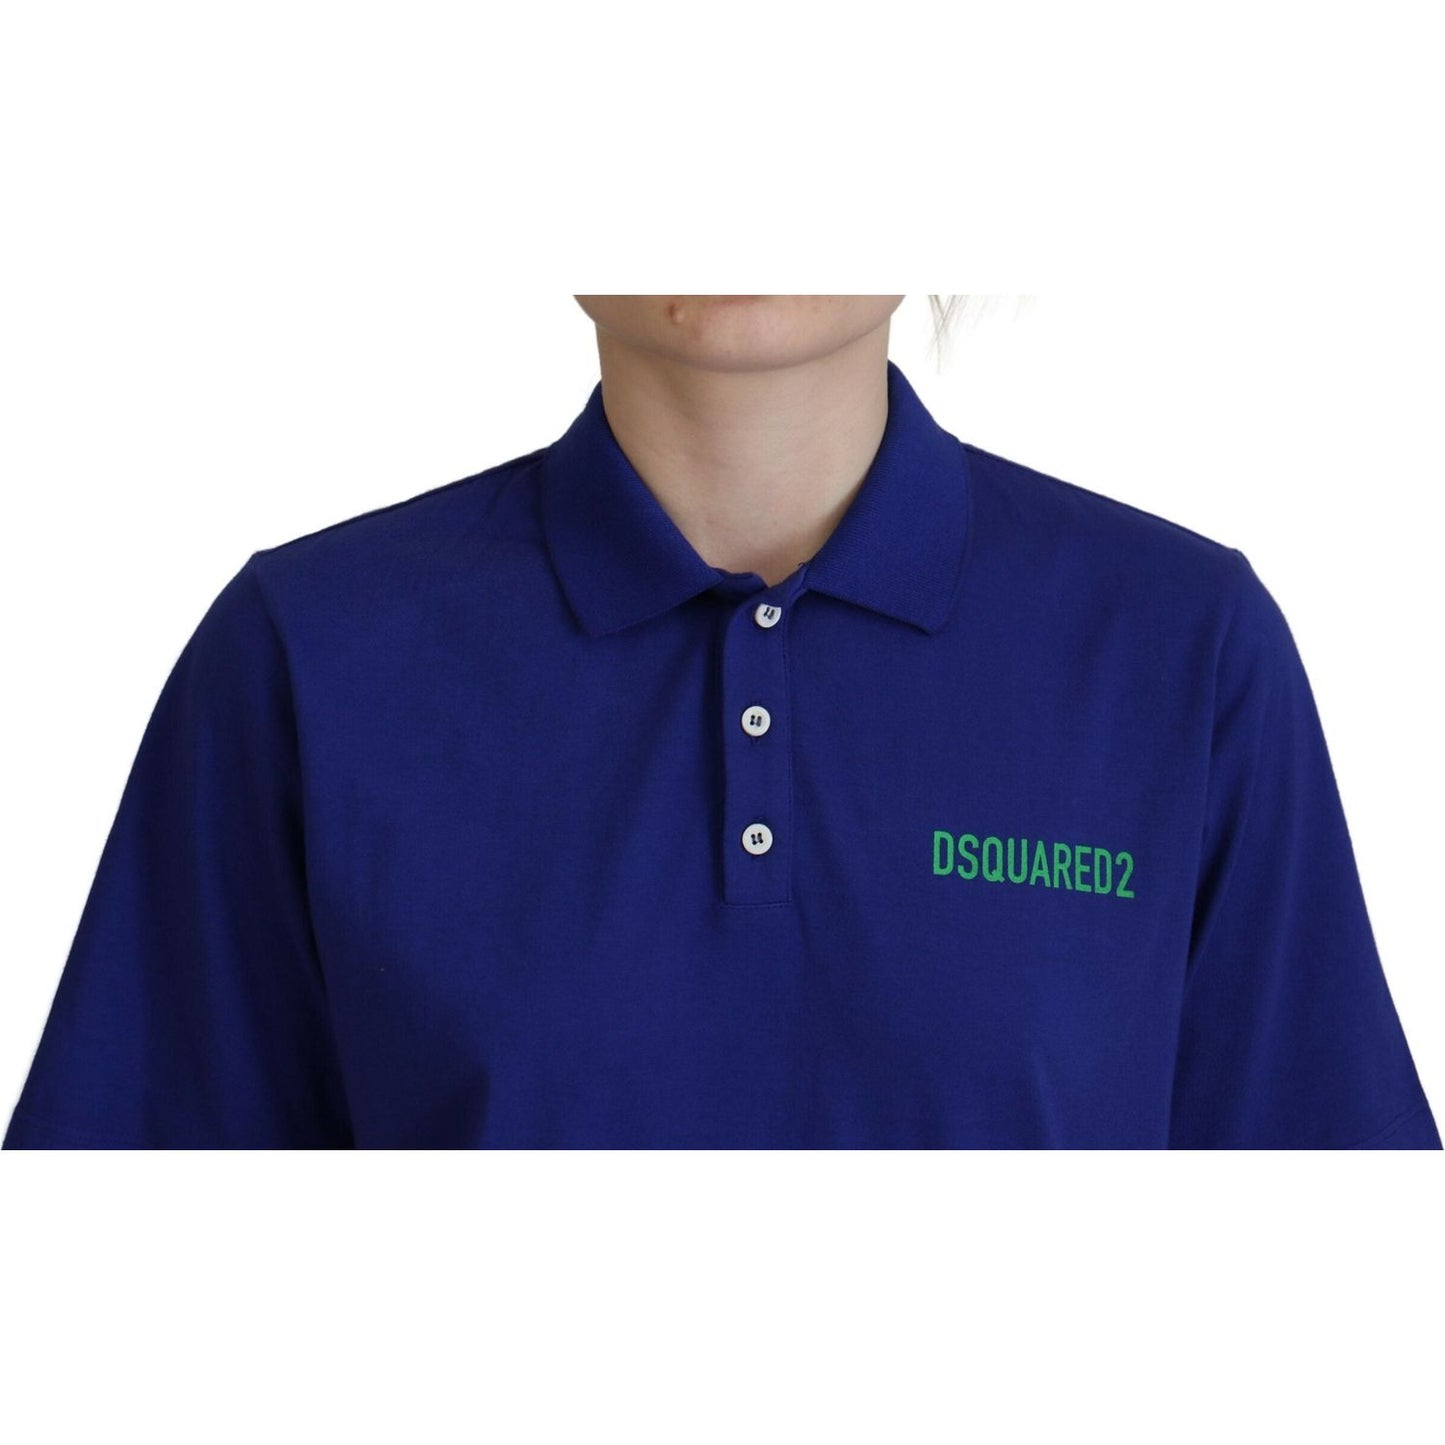 Dsquared² Blue Collared Writings Polo Short Sleeves T-shirt blue-collared-writings-polo-short-sleeves-t-shirt